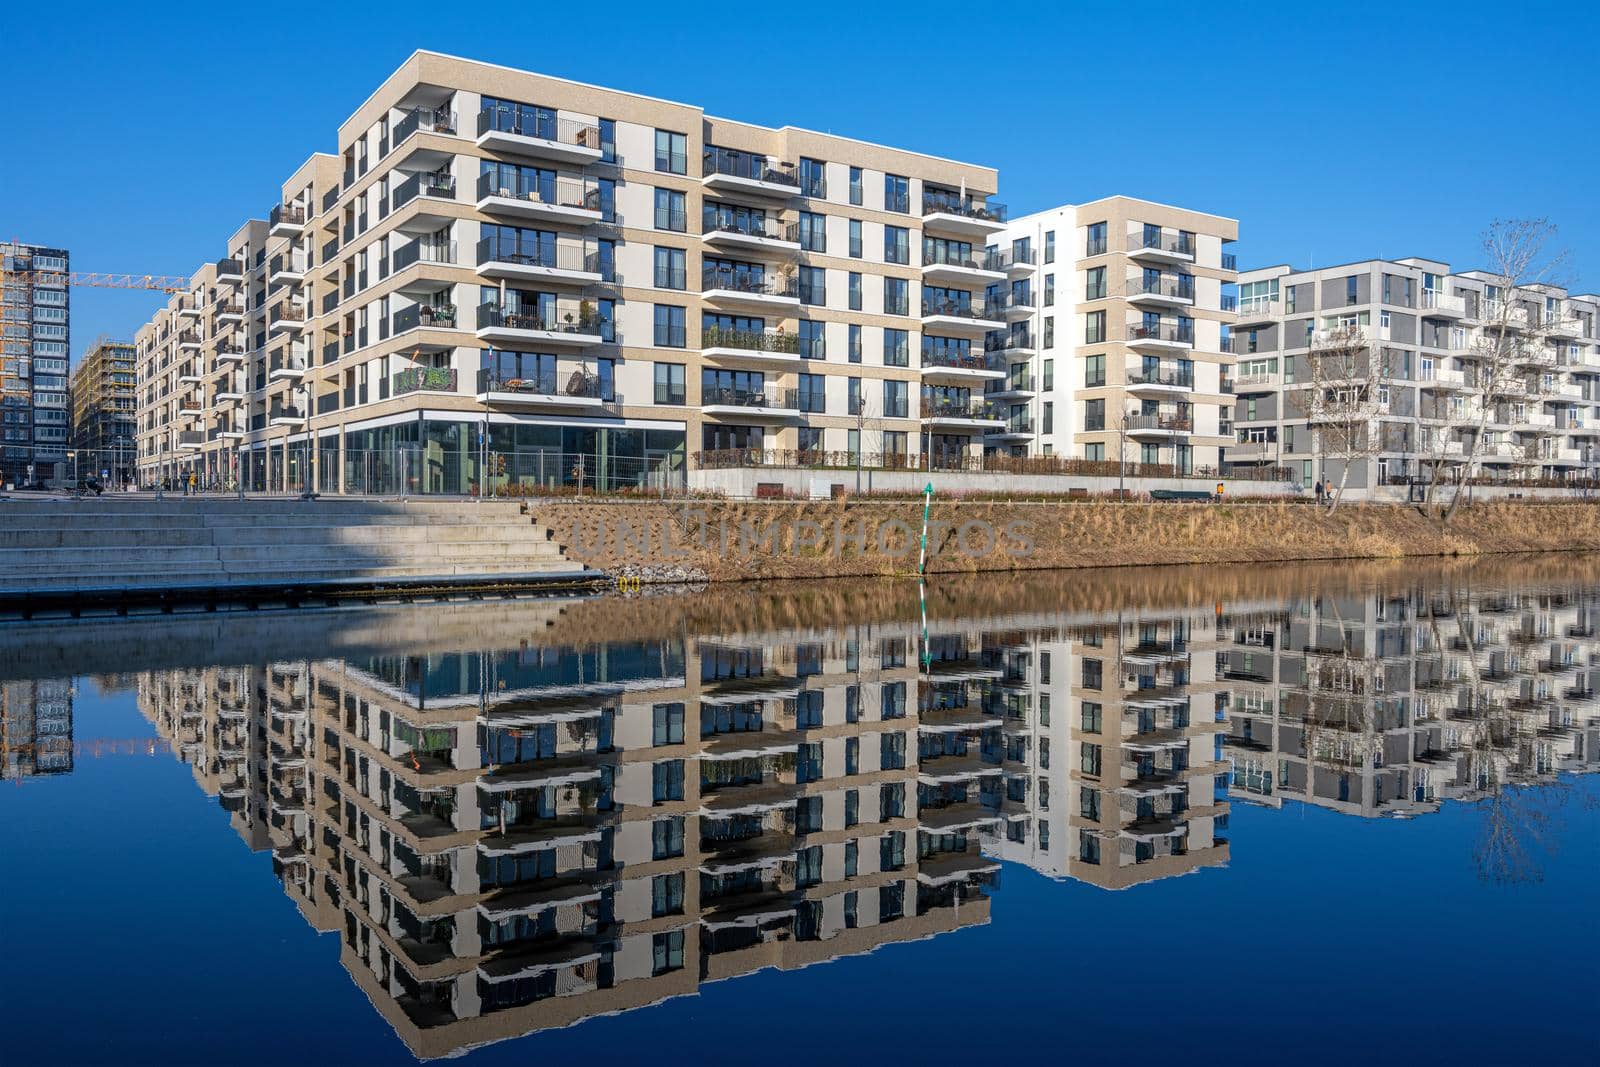 Modern apartment buildings in Berlin with a perfect reflection in a small canal